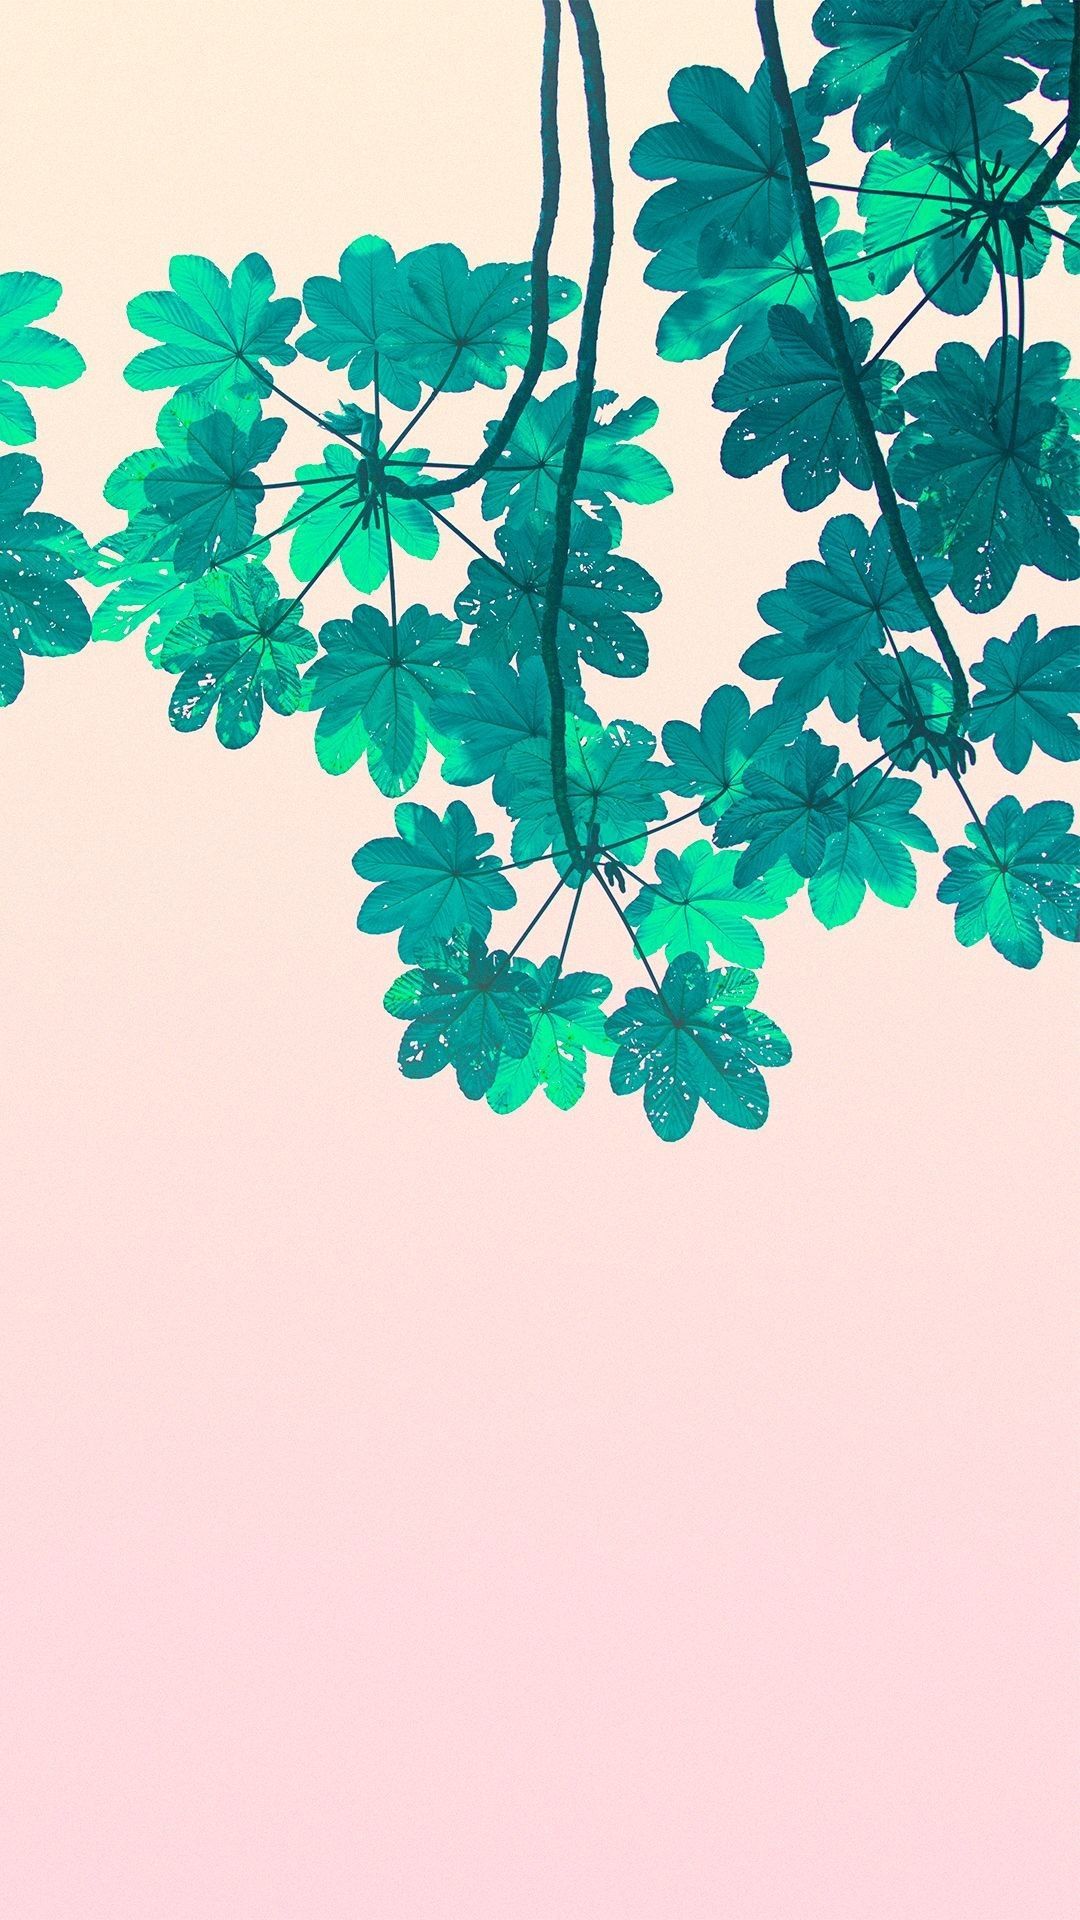 Green leaves wallpaper for iPhone with high-resolution 1080x1920 pixel. You can use this wallpaper for your iPhone 5, 6, 7, 8, X, XS, XR backgrounds, Mobile Screensaver, or iPad Lock Screen - Pastel minimalist, minimalist